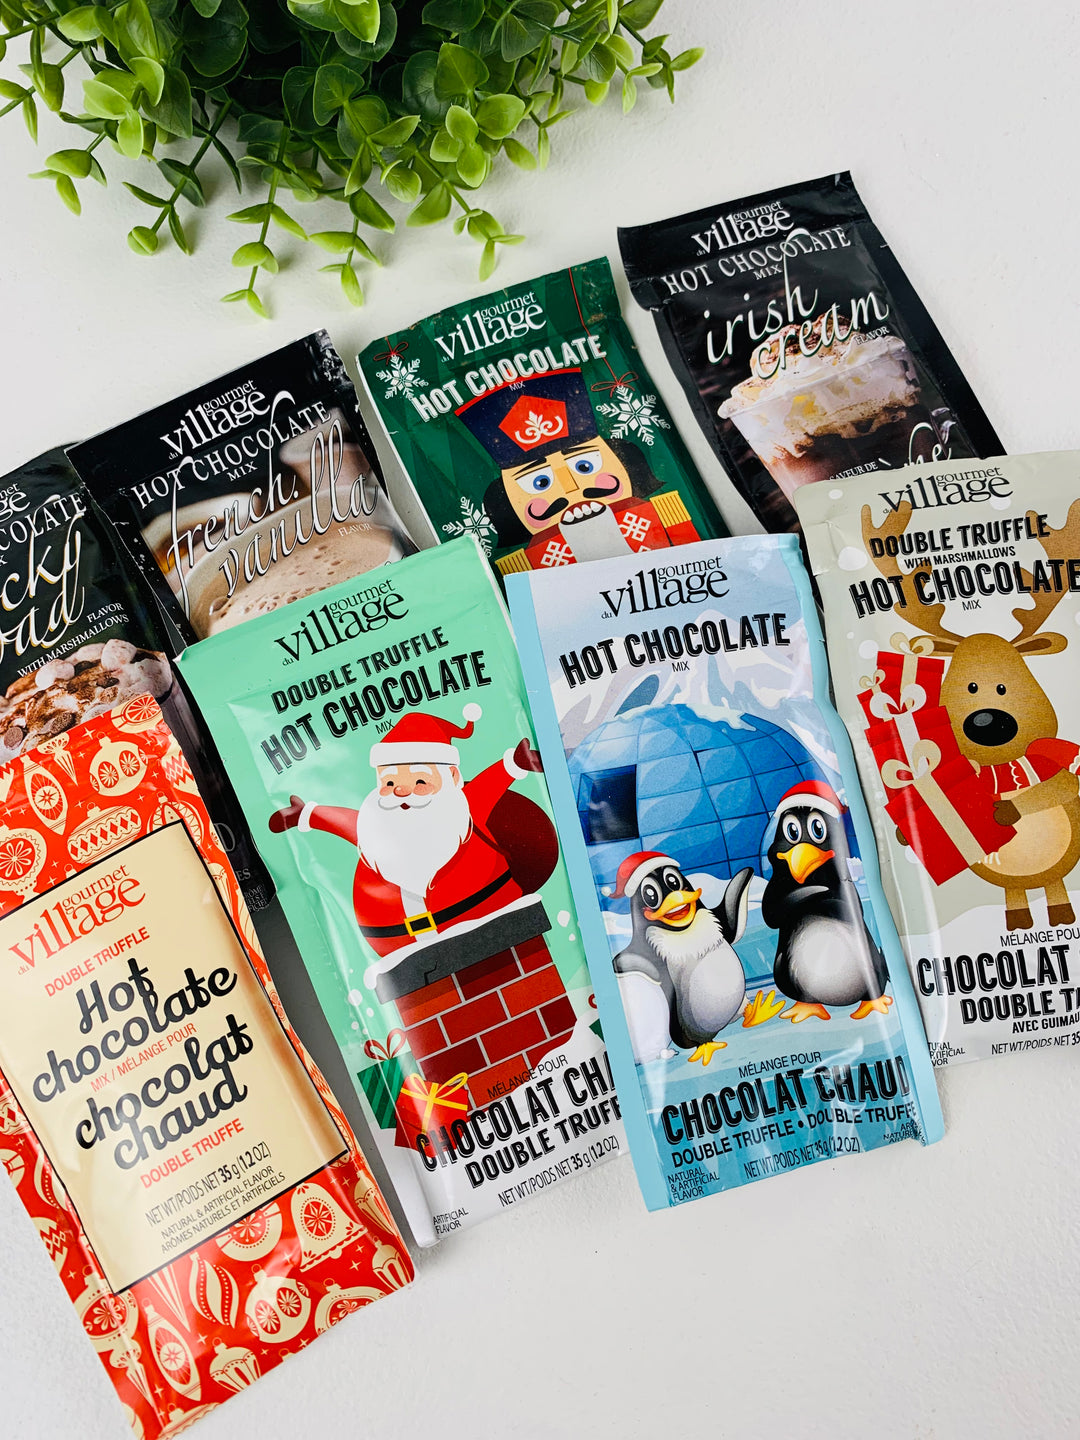 Lindsay's Creations, Gourmet Village Hot Cocoa Packets